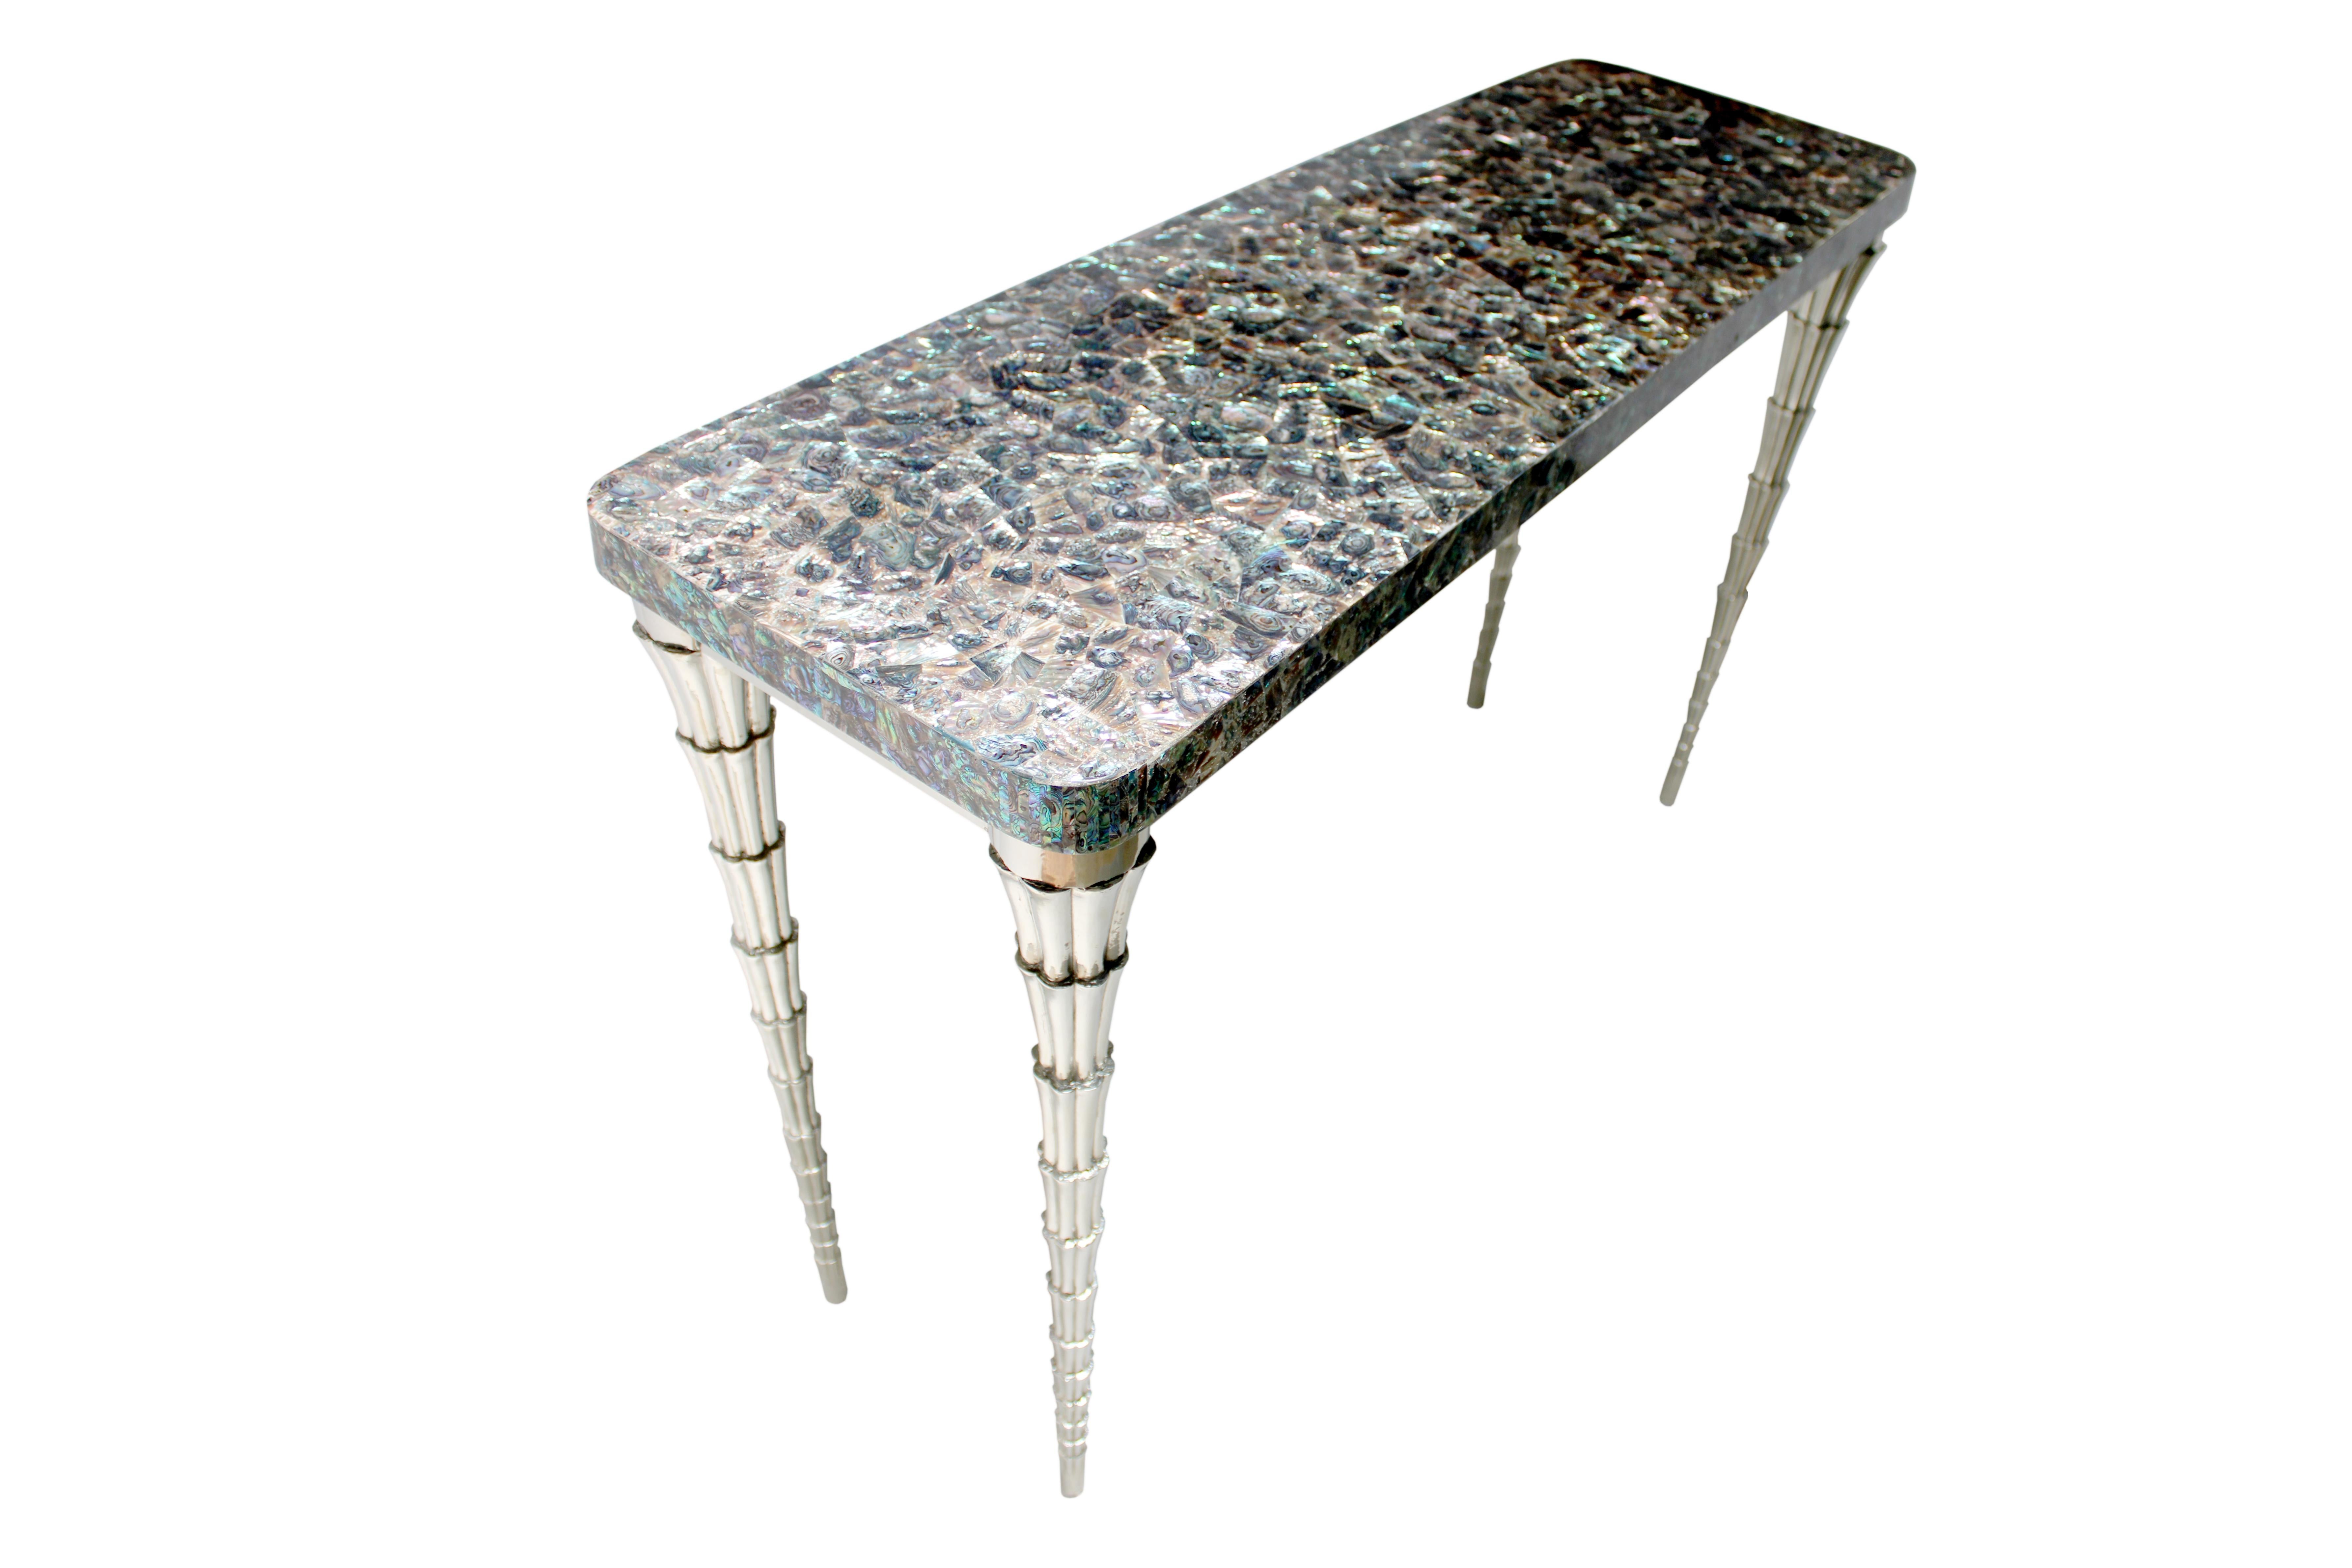 Cornet table designed by Paul Mathieu for the Stephanie Odegard Co. Ltd. Jewelry for the home, this hand carved teak console table is clad in White bronze and adorned with an abalone mosaic top.The CORNET table named for the elements of the legs